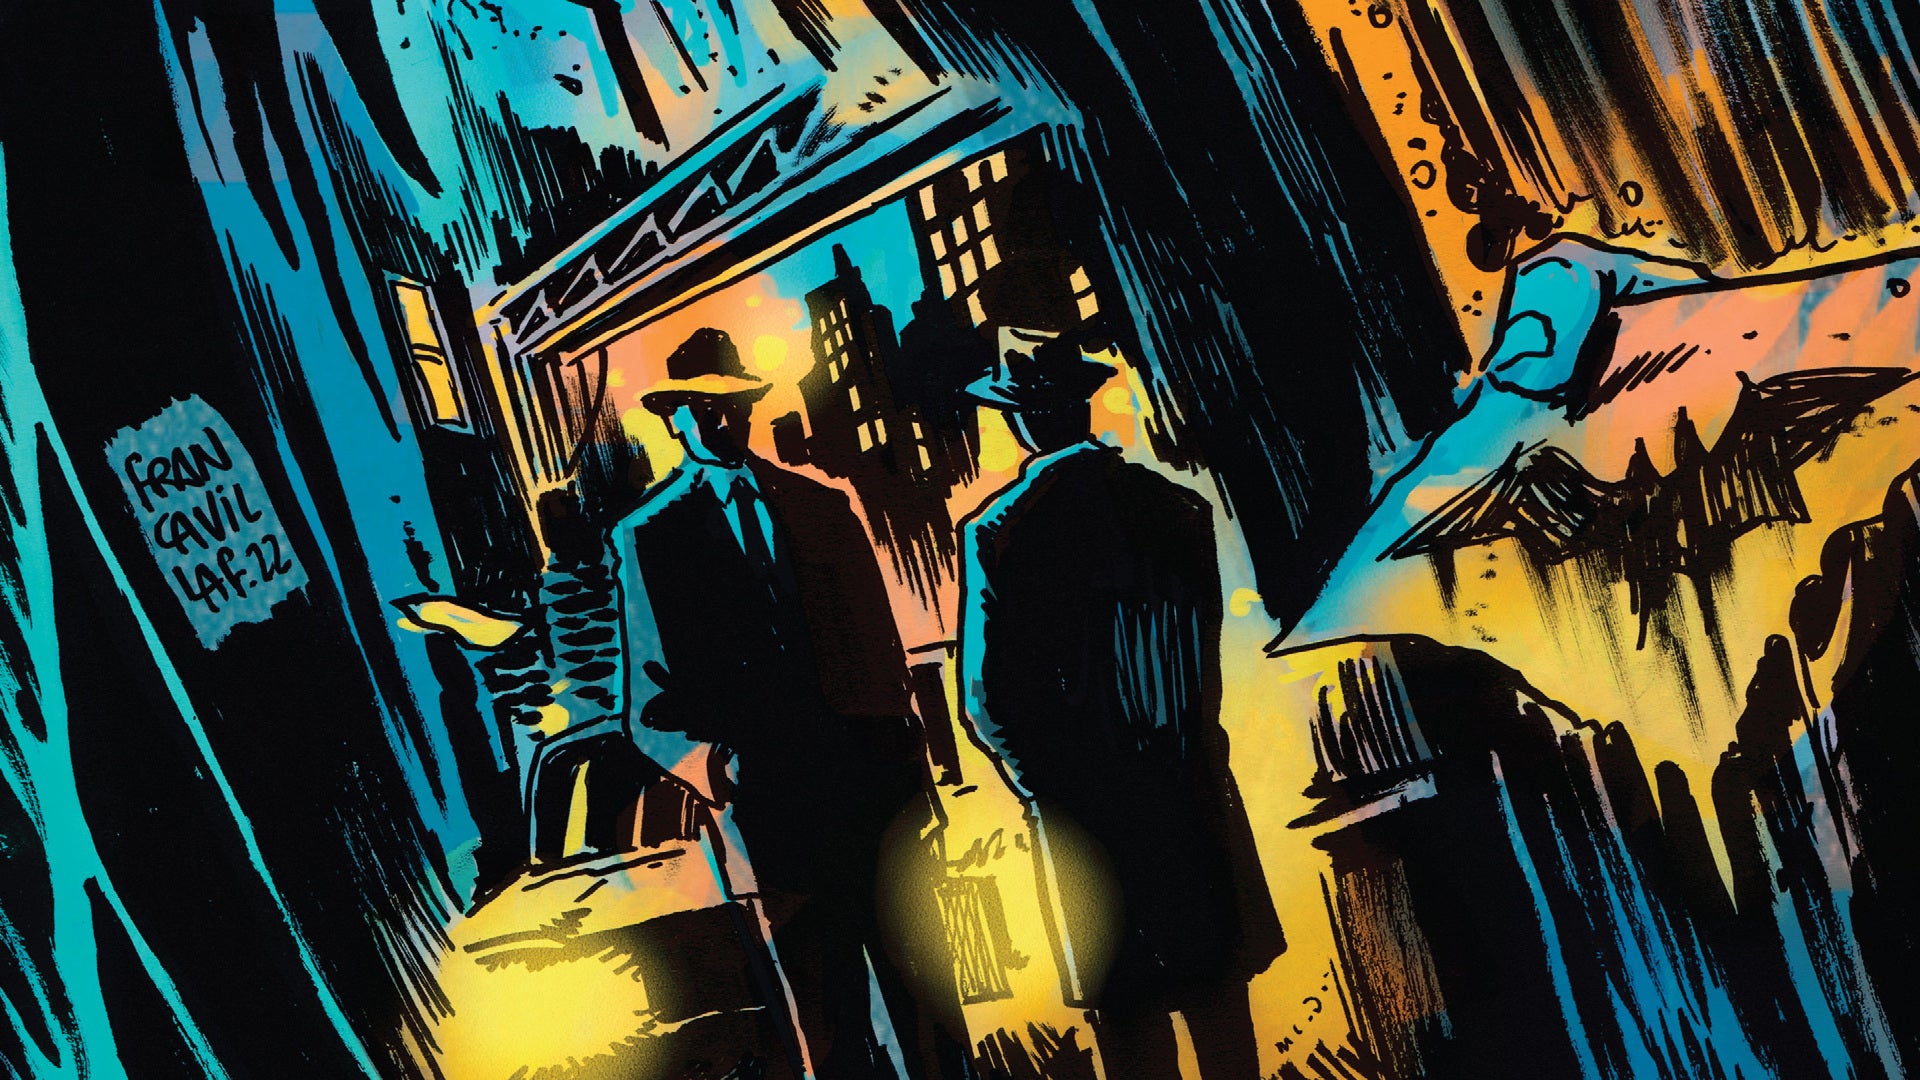 Cropped image by Francavilla featuring two figures in suit talking in an alley, and a hand holding a piece of paper that has a  bat on it